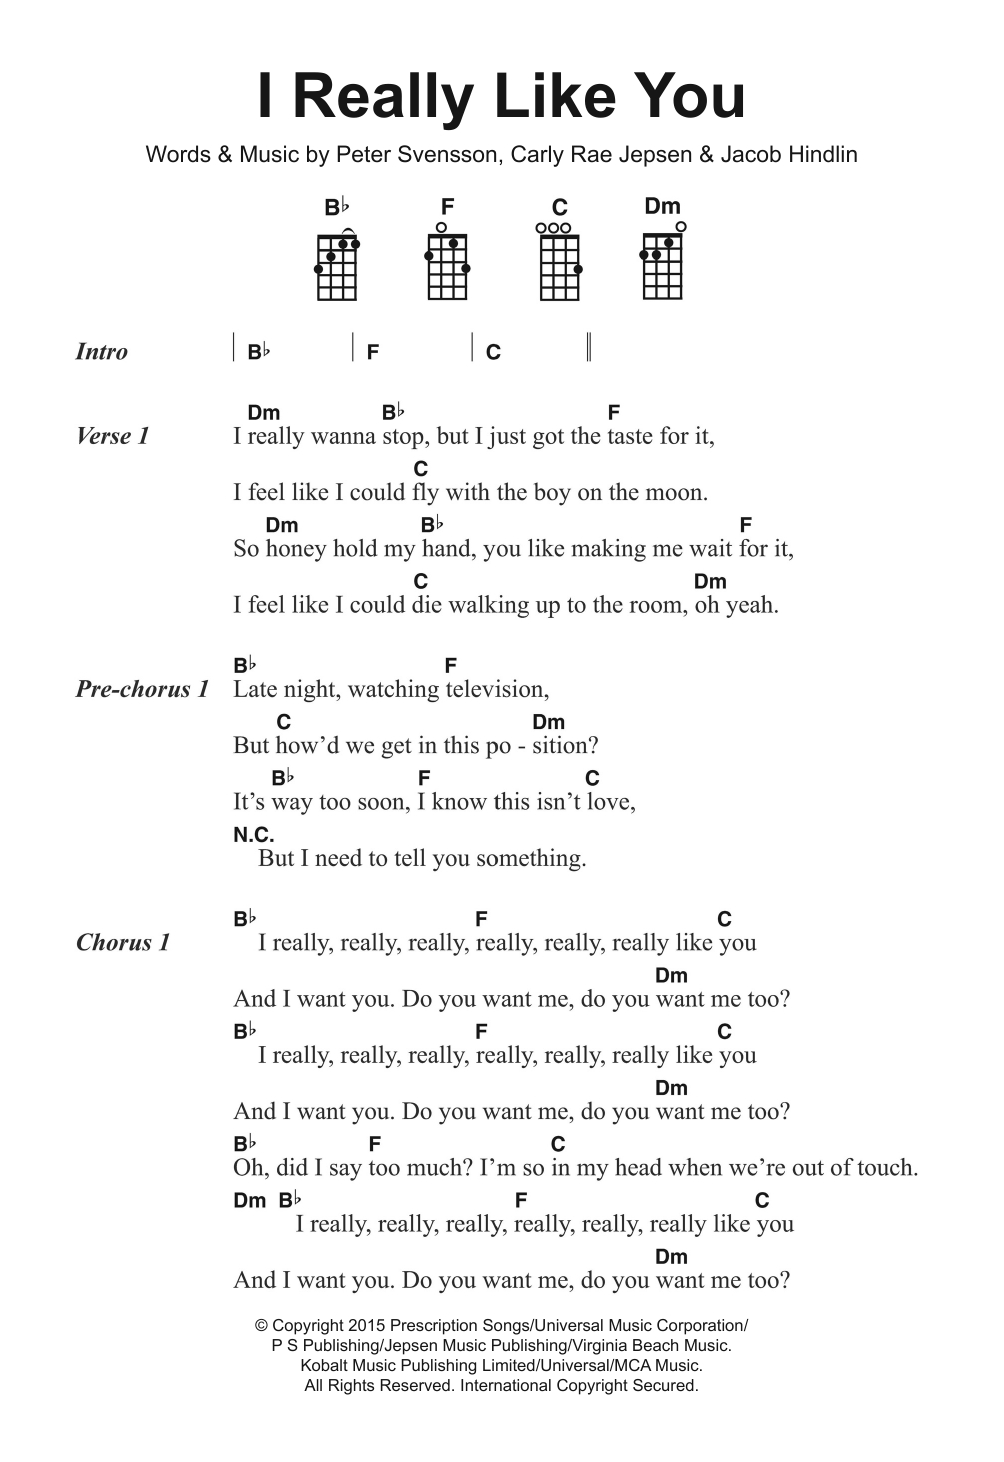 Download Carly Rae Jepsen I Really Like You Sheet Music